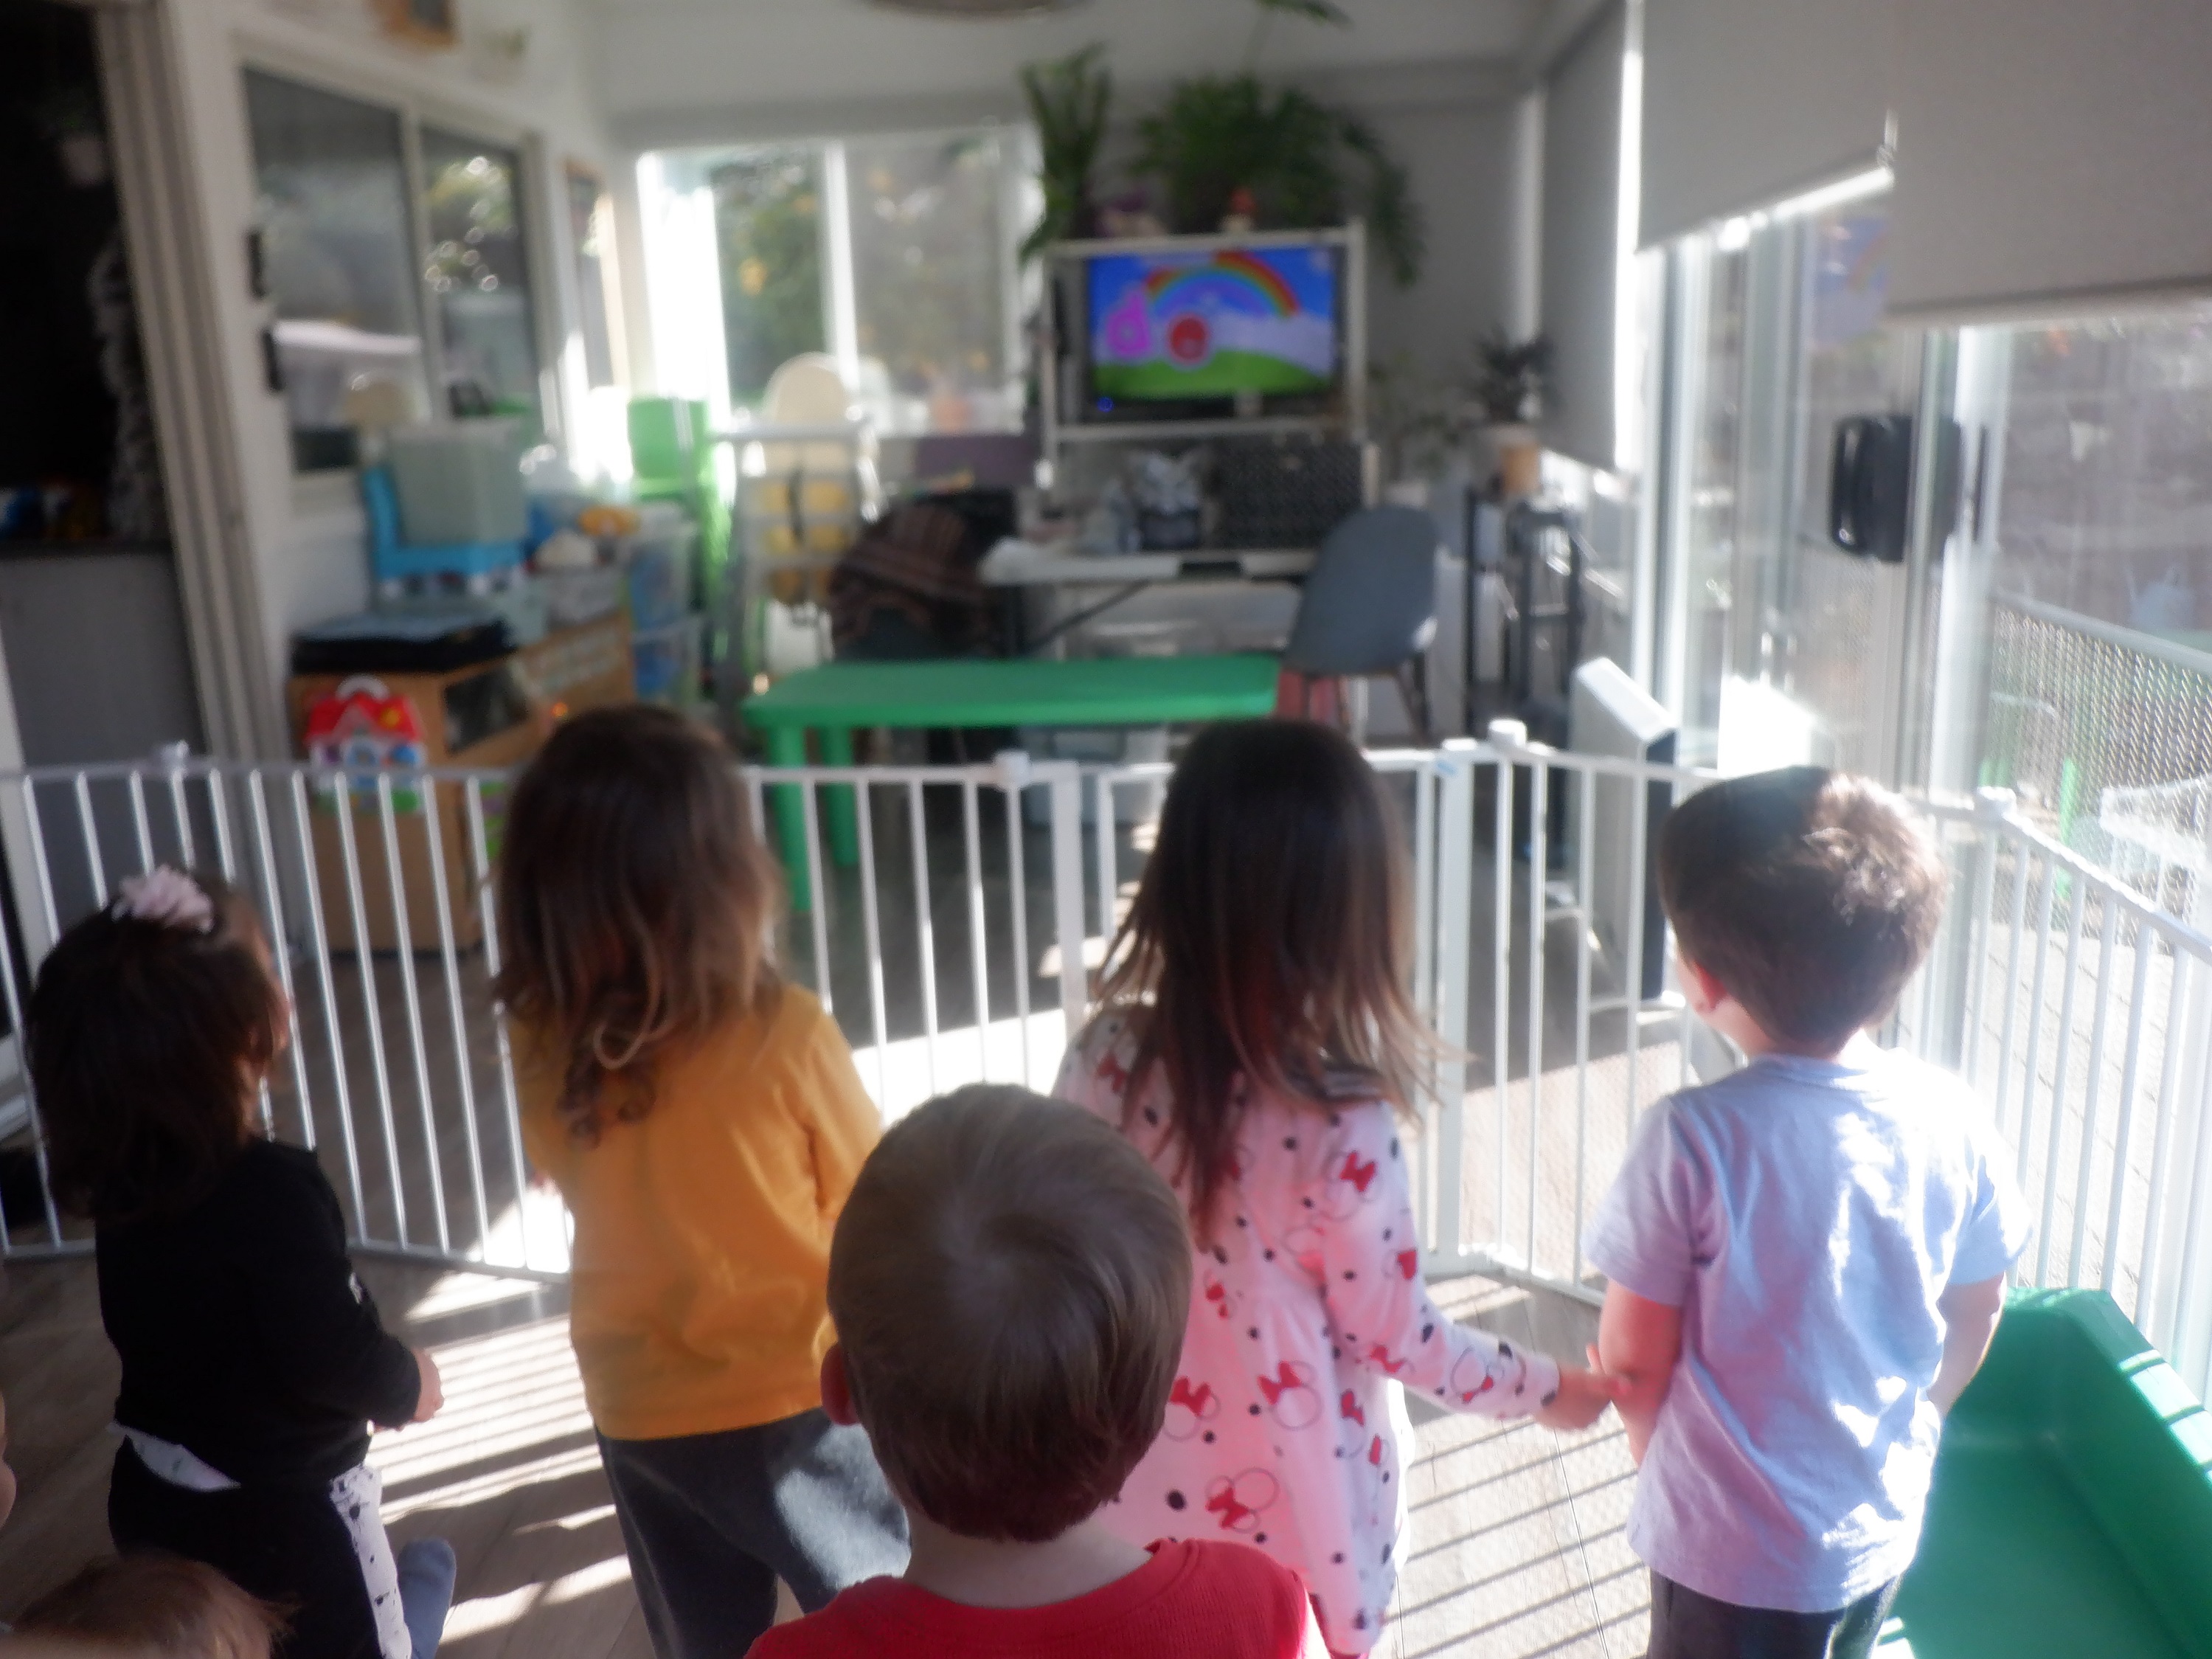 Kids at work watching a video about rainbows